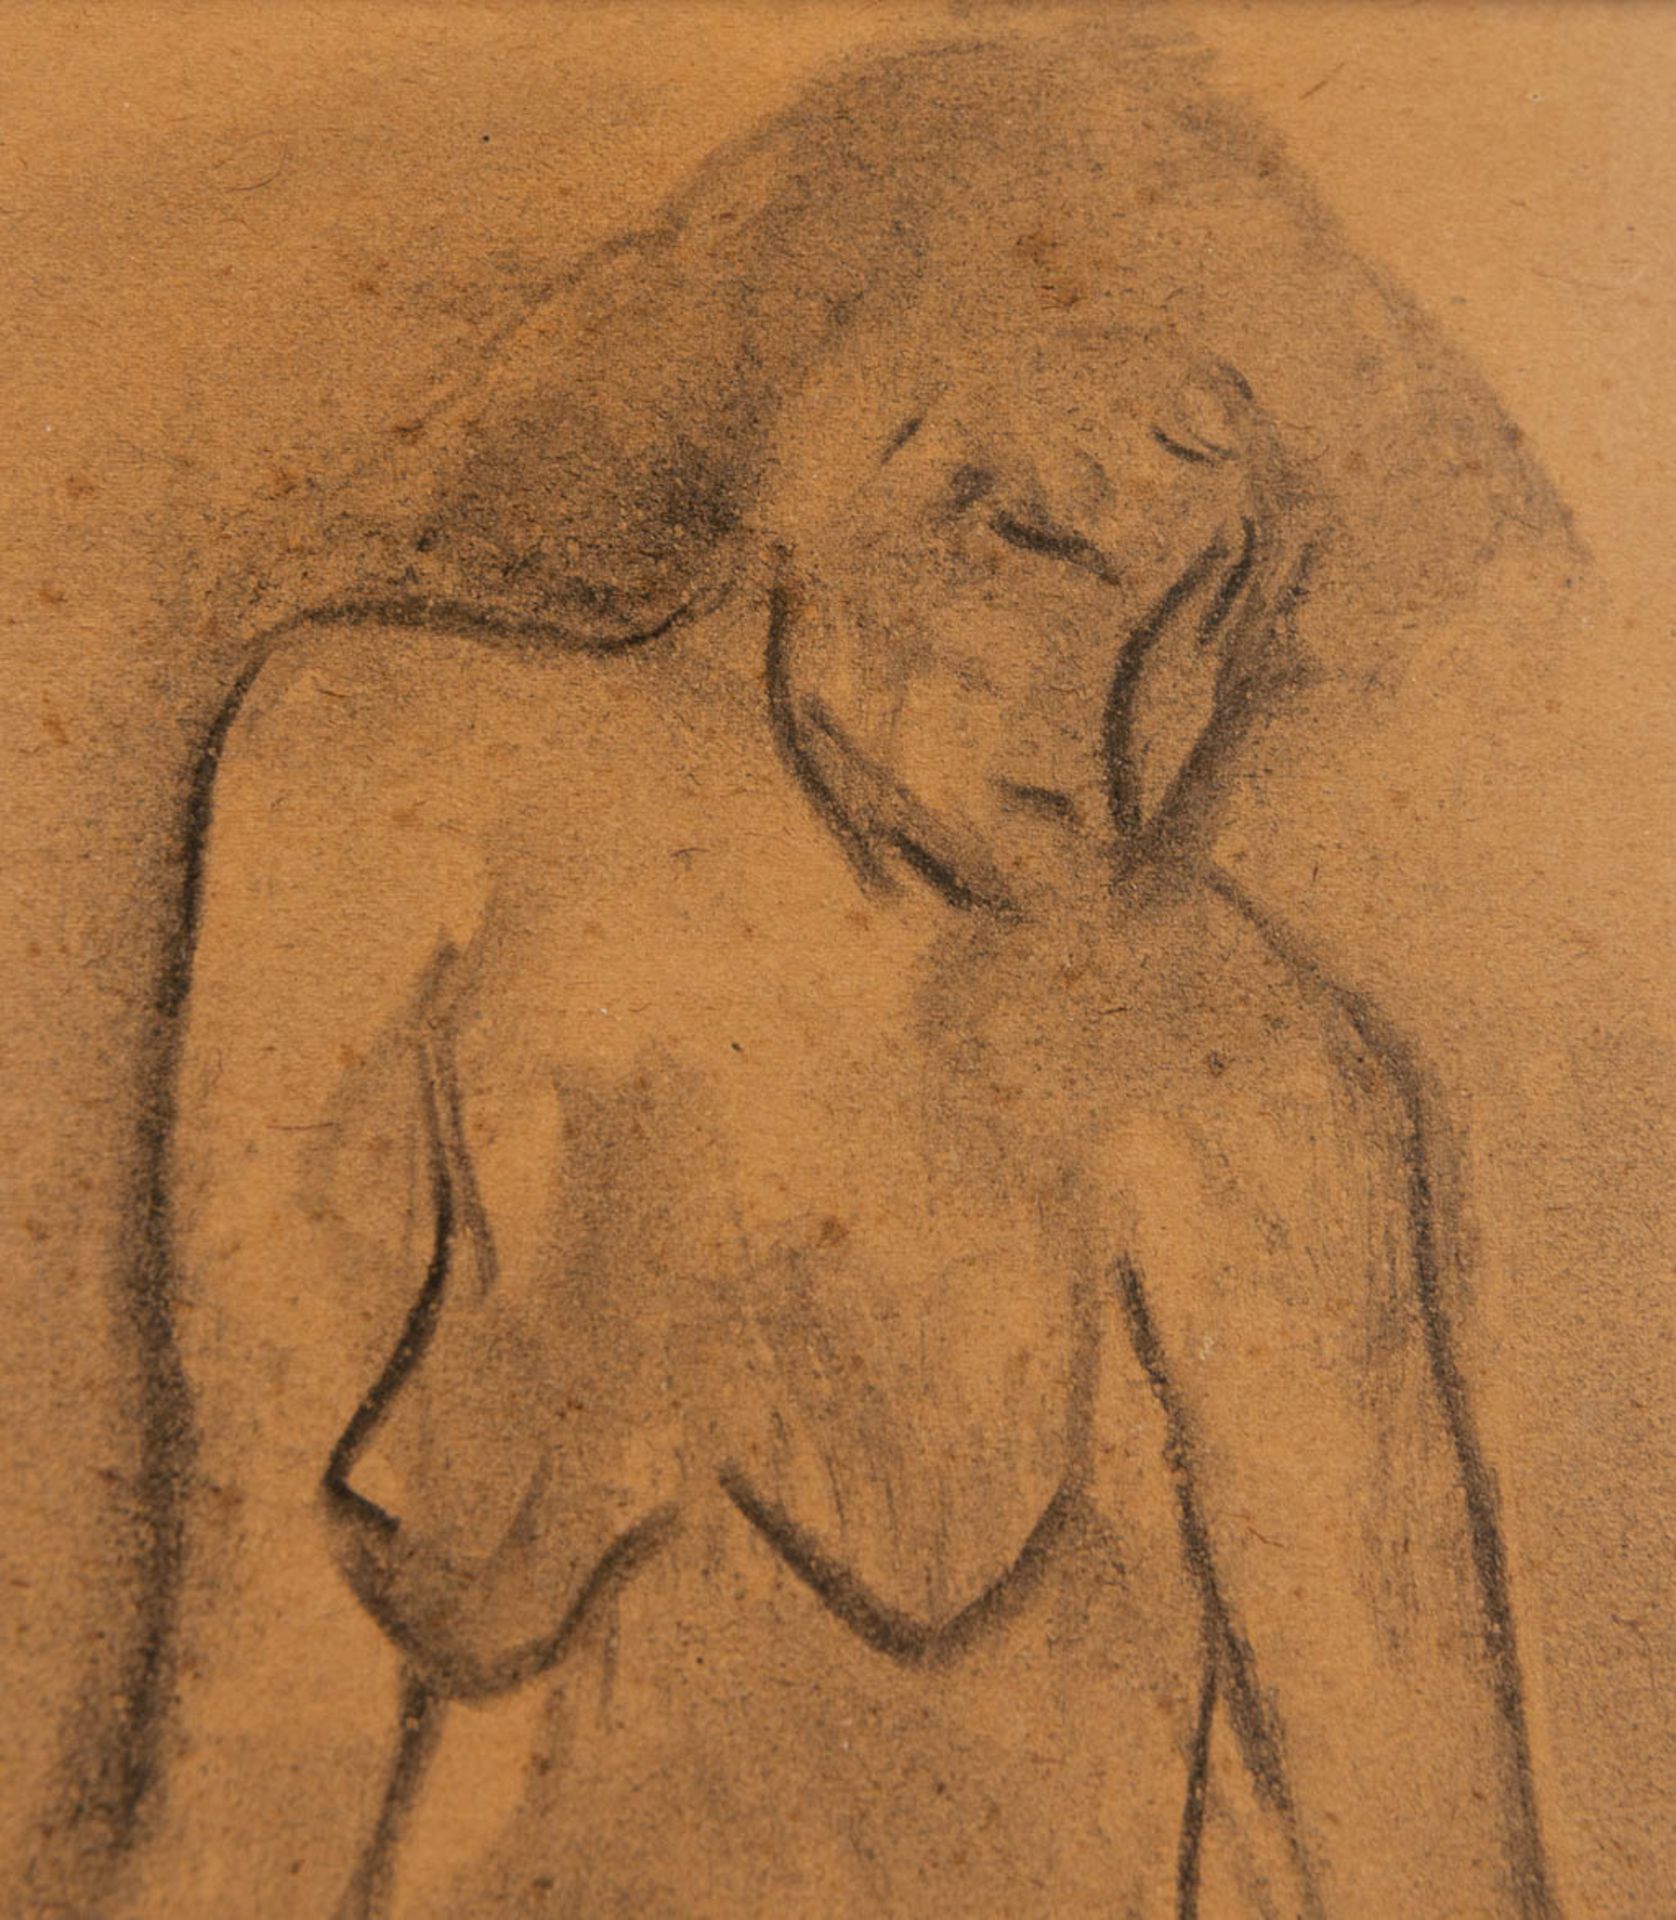 Constant PERMEKE (1886-1952) 'sitting naked' a drawing, pencil on paper. (17 x 25 cm) - Image 10 of 10